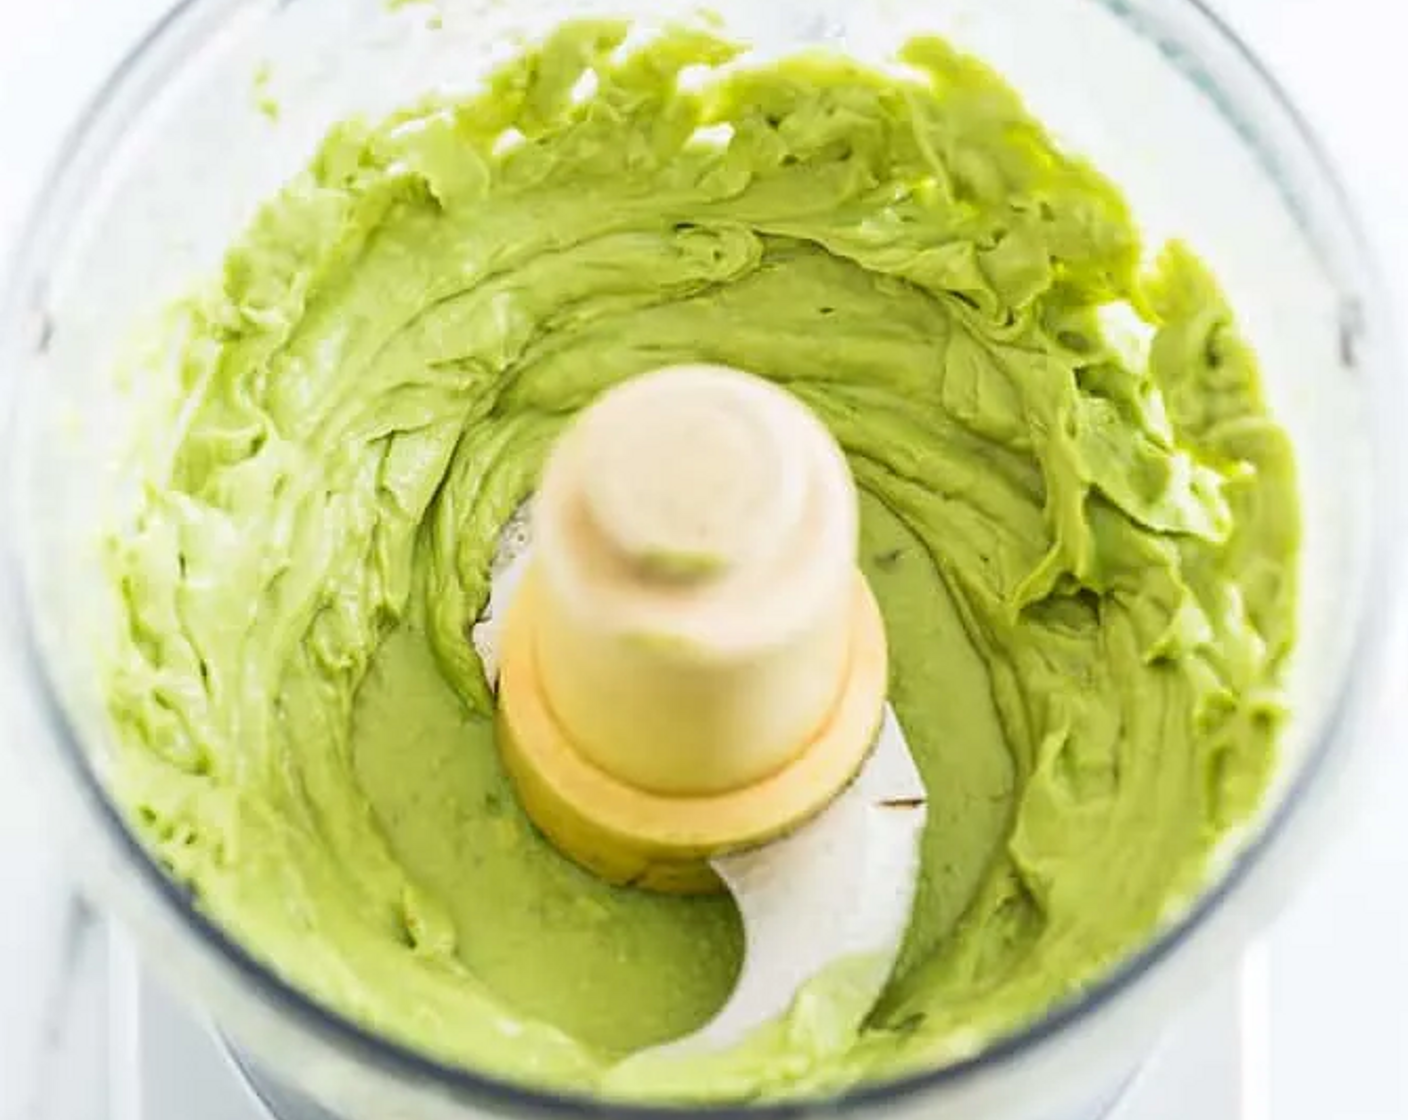 step 5 Rinse the bowl and place it back on the base with the chopping blade for the dressing. Peel the Avocados (2) and remove the pit. Place them in the food processor, add the juice from Lemons (1 1/4) and Sea Salt (1/2 Tbsp), and process until mostly smooth.